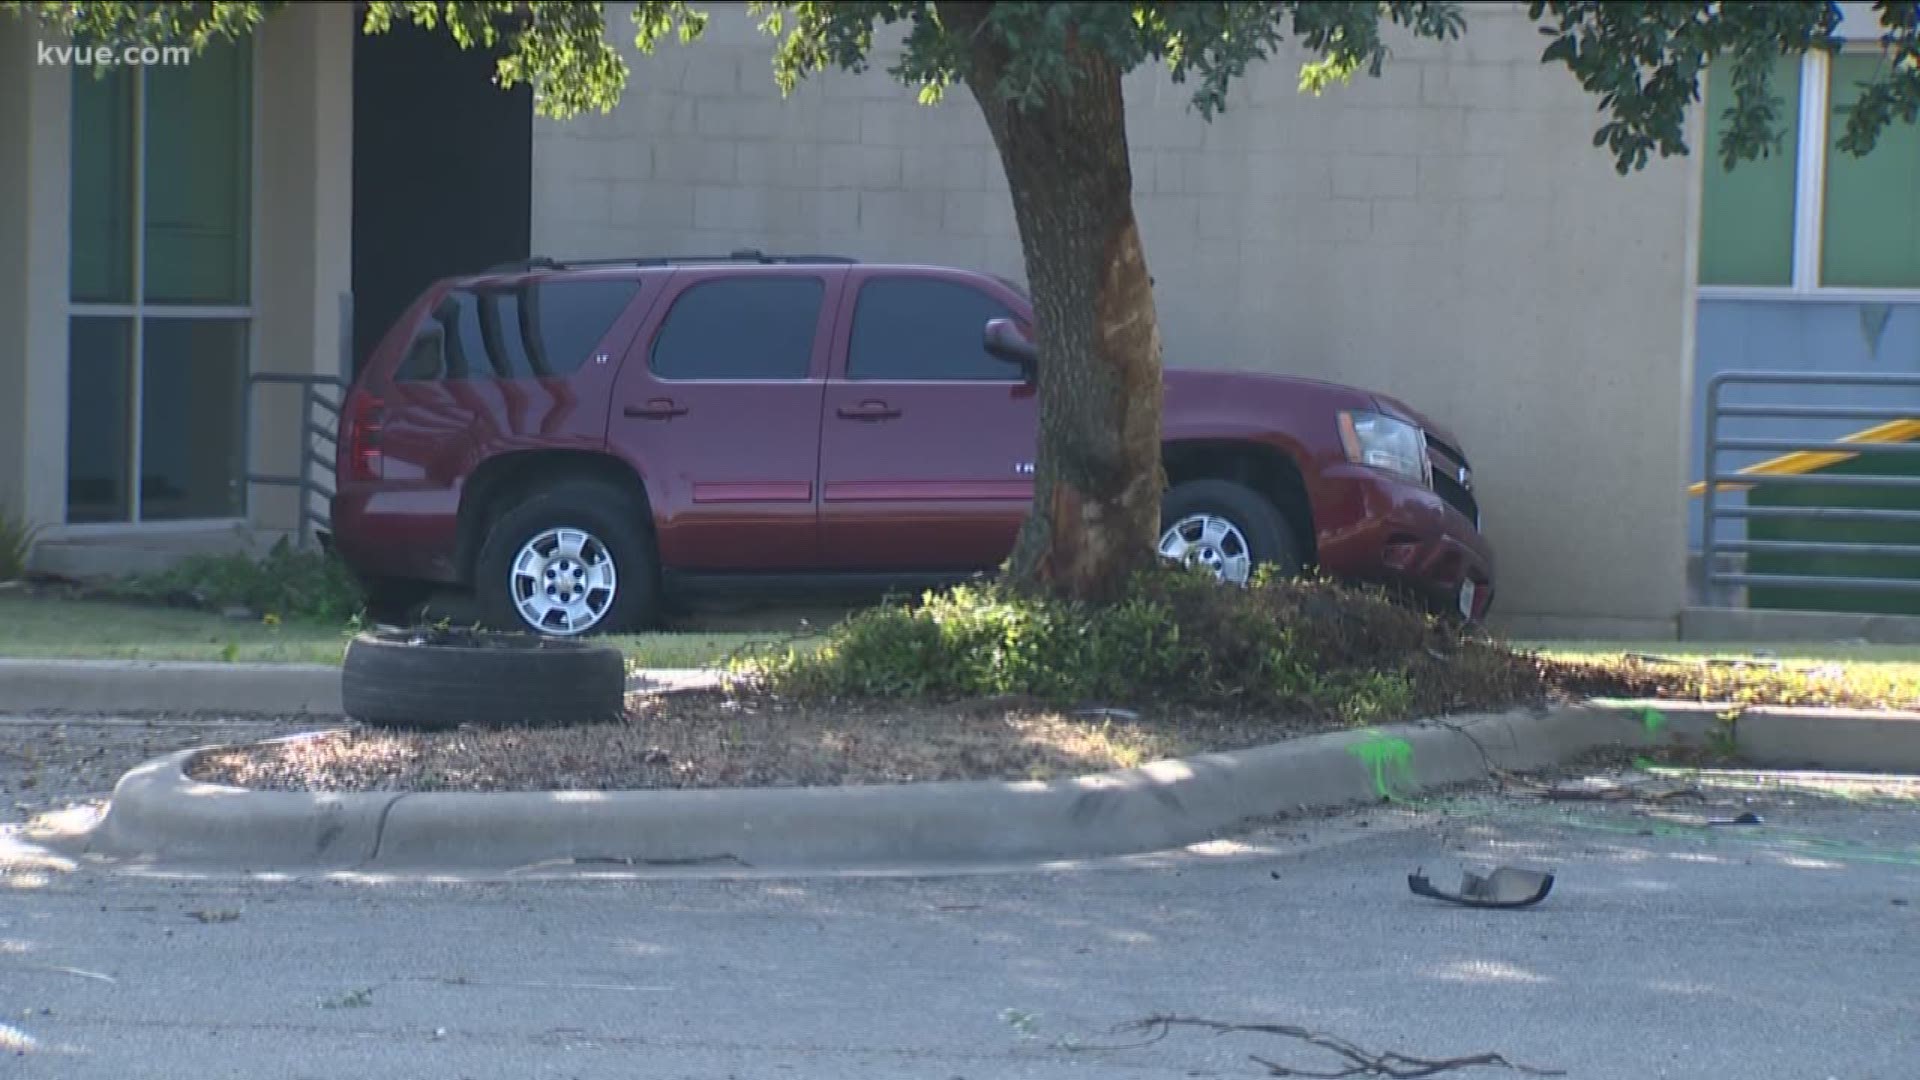 A woman is dead after the SUV she was riding in crashed into a tree near a Lower Colorado River Authority building in Austin – and police said the driver and other passengers ran off after the crash.